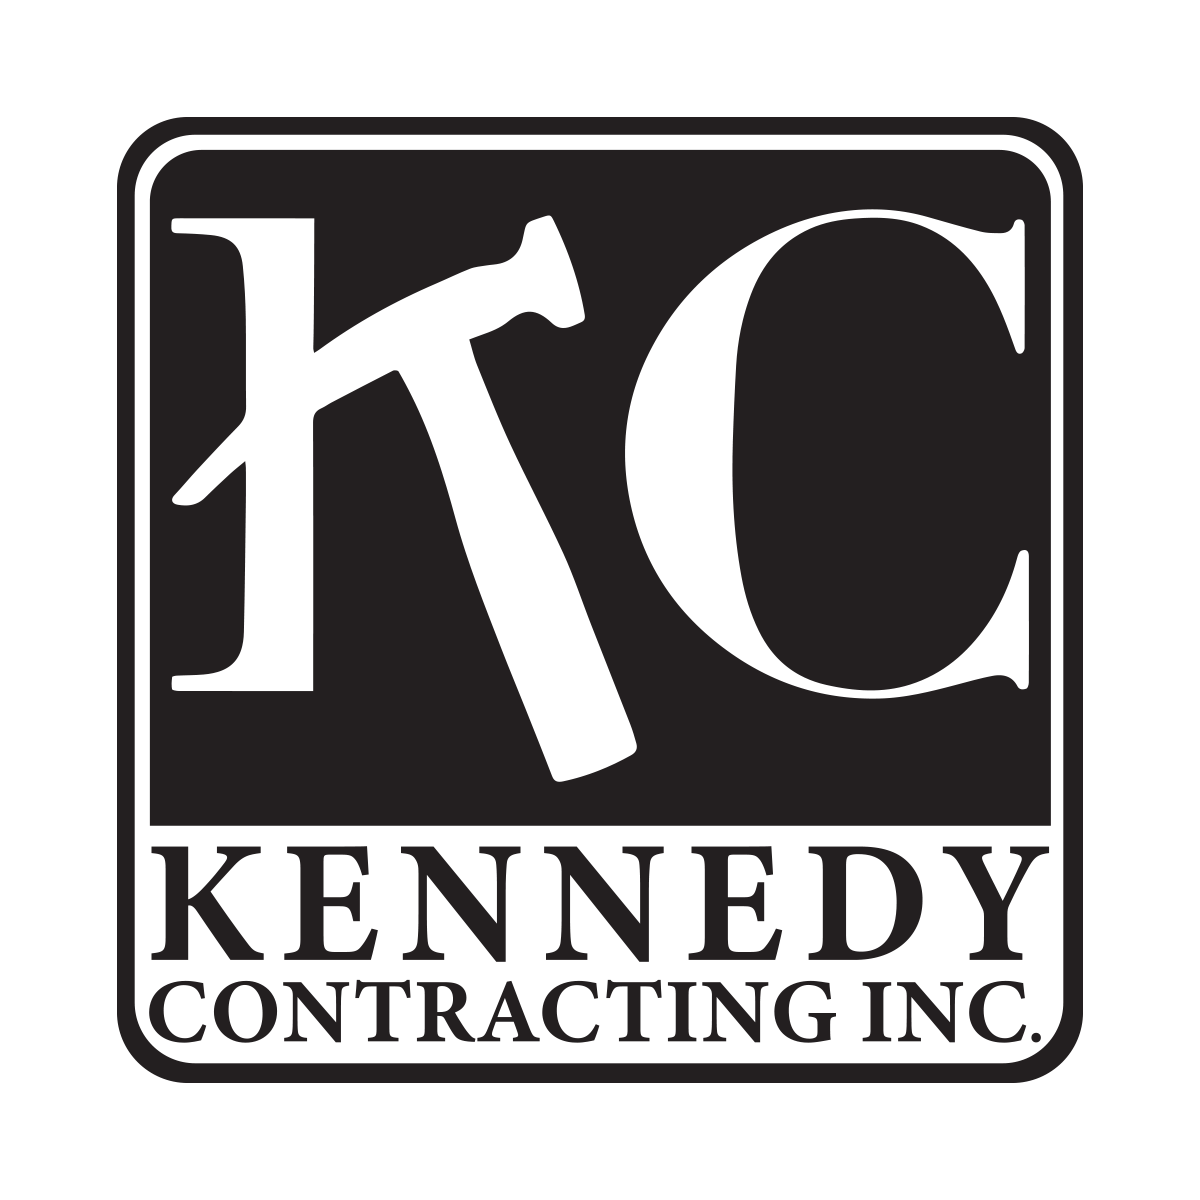 Kennedy Contracting